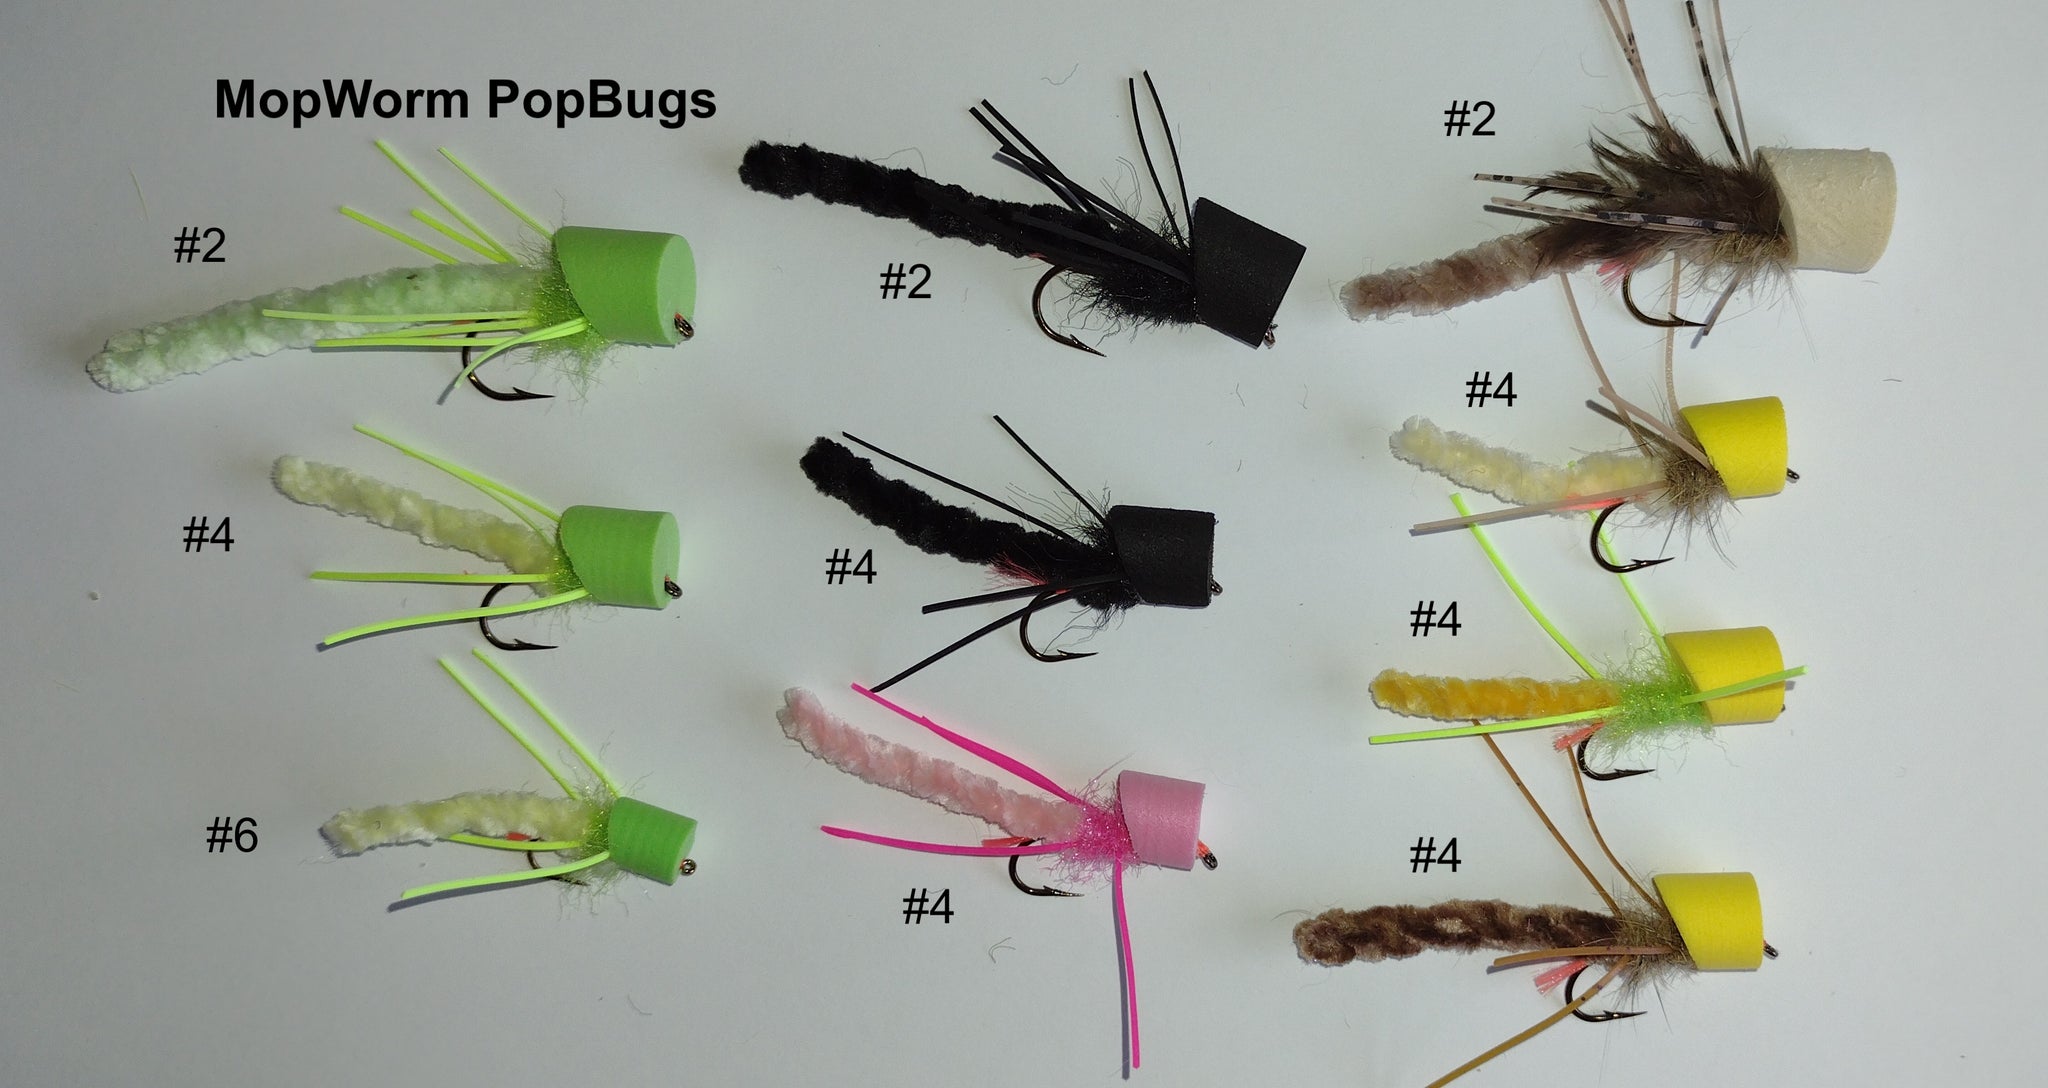 Mop Worm Popper Patterns Sizes #6 to #2